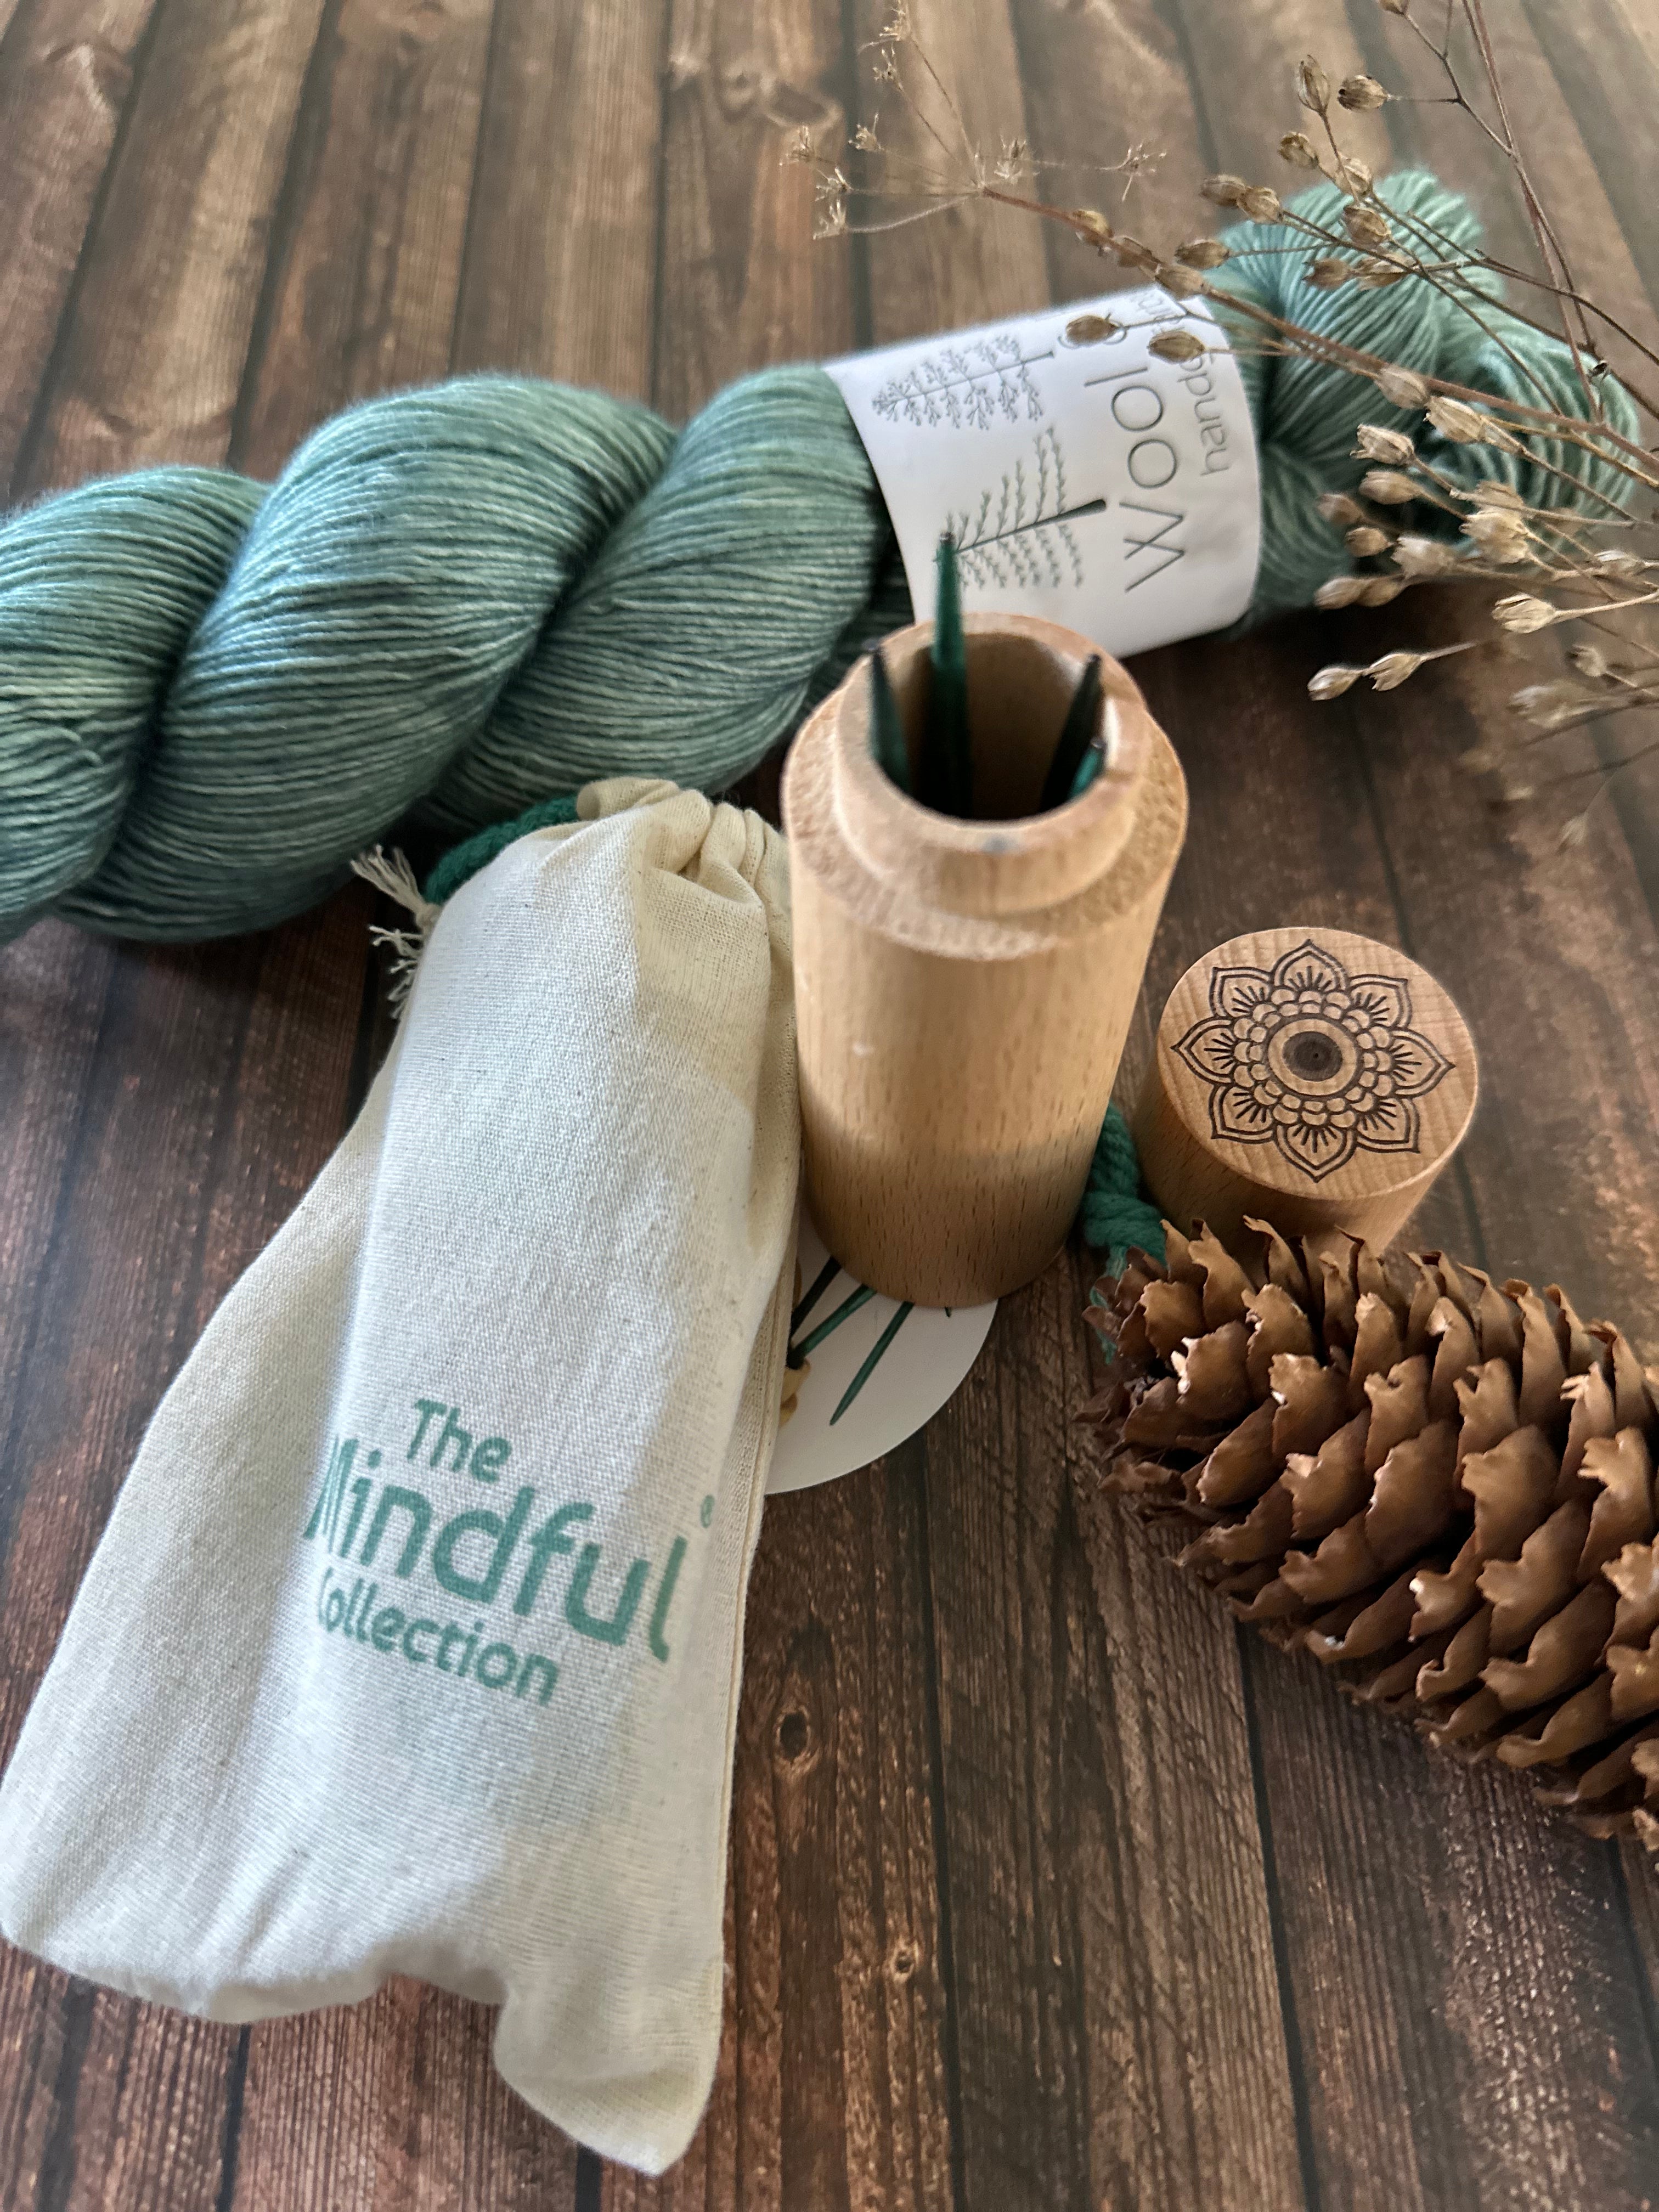 Wool Needle Set - Knit Pro The Mindful Collection -